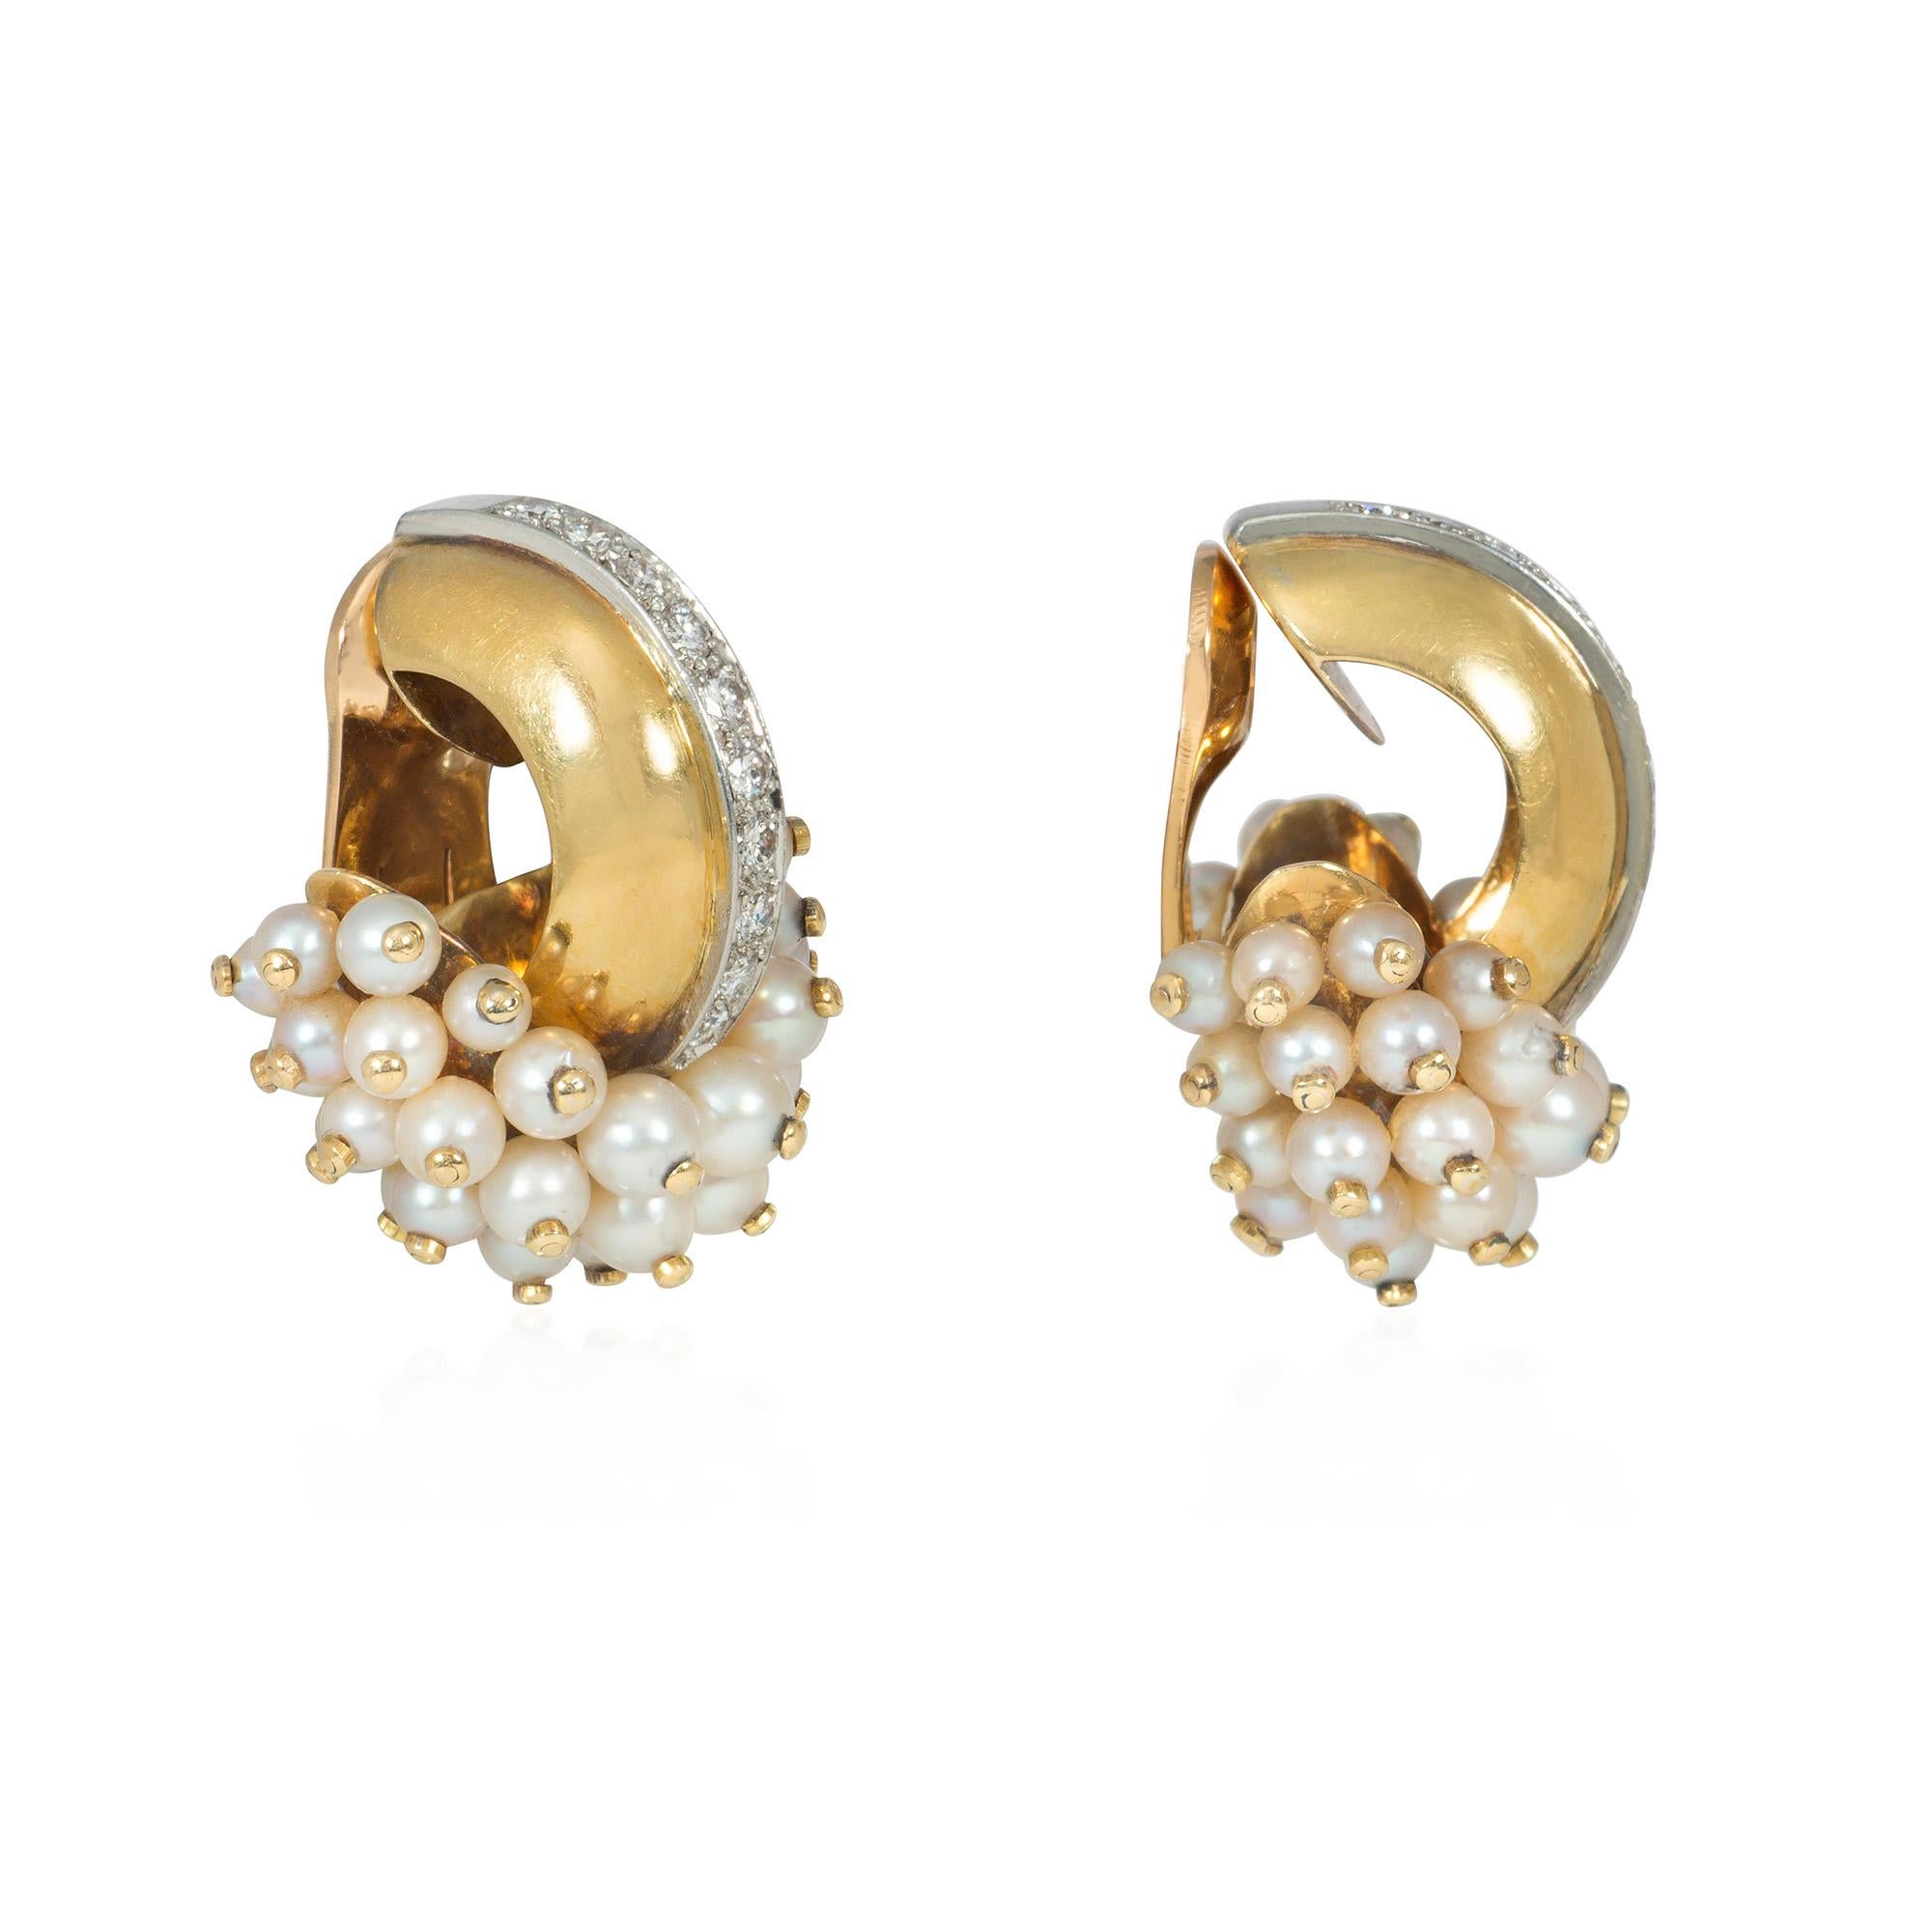 A pair of Art Moderne earrings in the form of stylized doorknockers with gold-beaded pearl terminals arranged in overlapping rows, suspended from front-facing half-hoop gold surmounts bisected by a line of diamonds, in 18k with clip backs. René